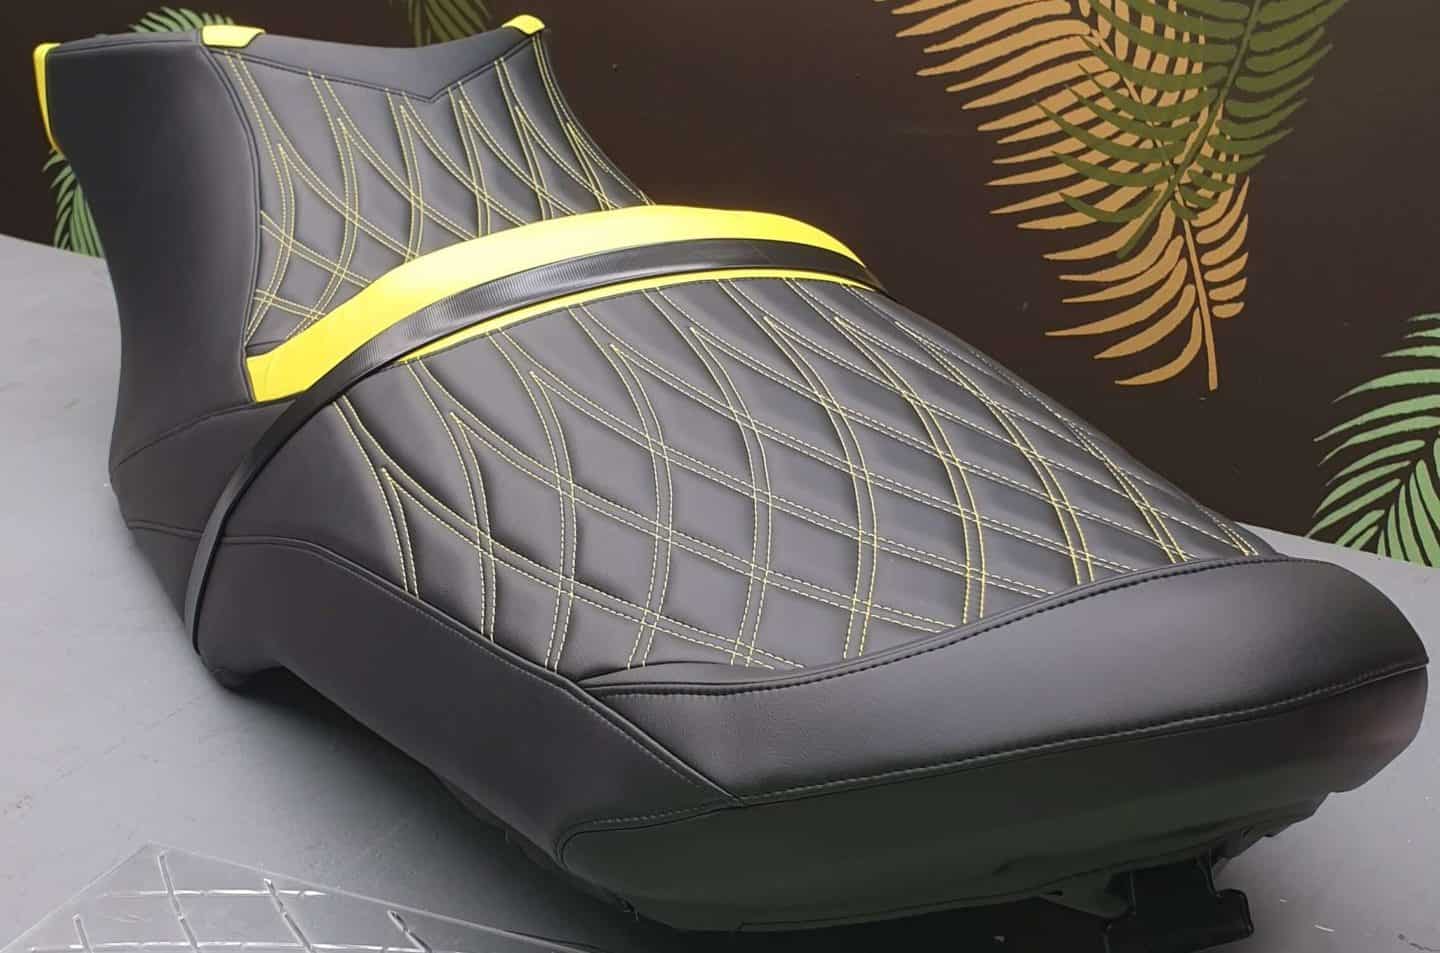 Jet ski seat upholstery in black and yellow